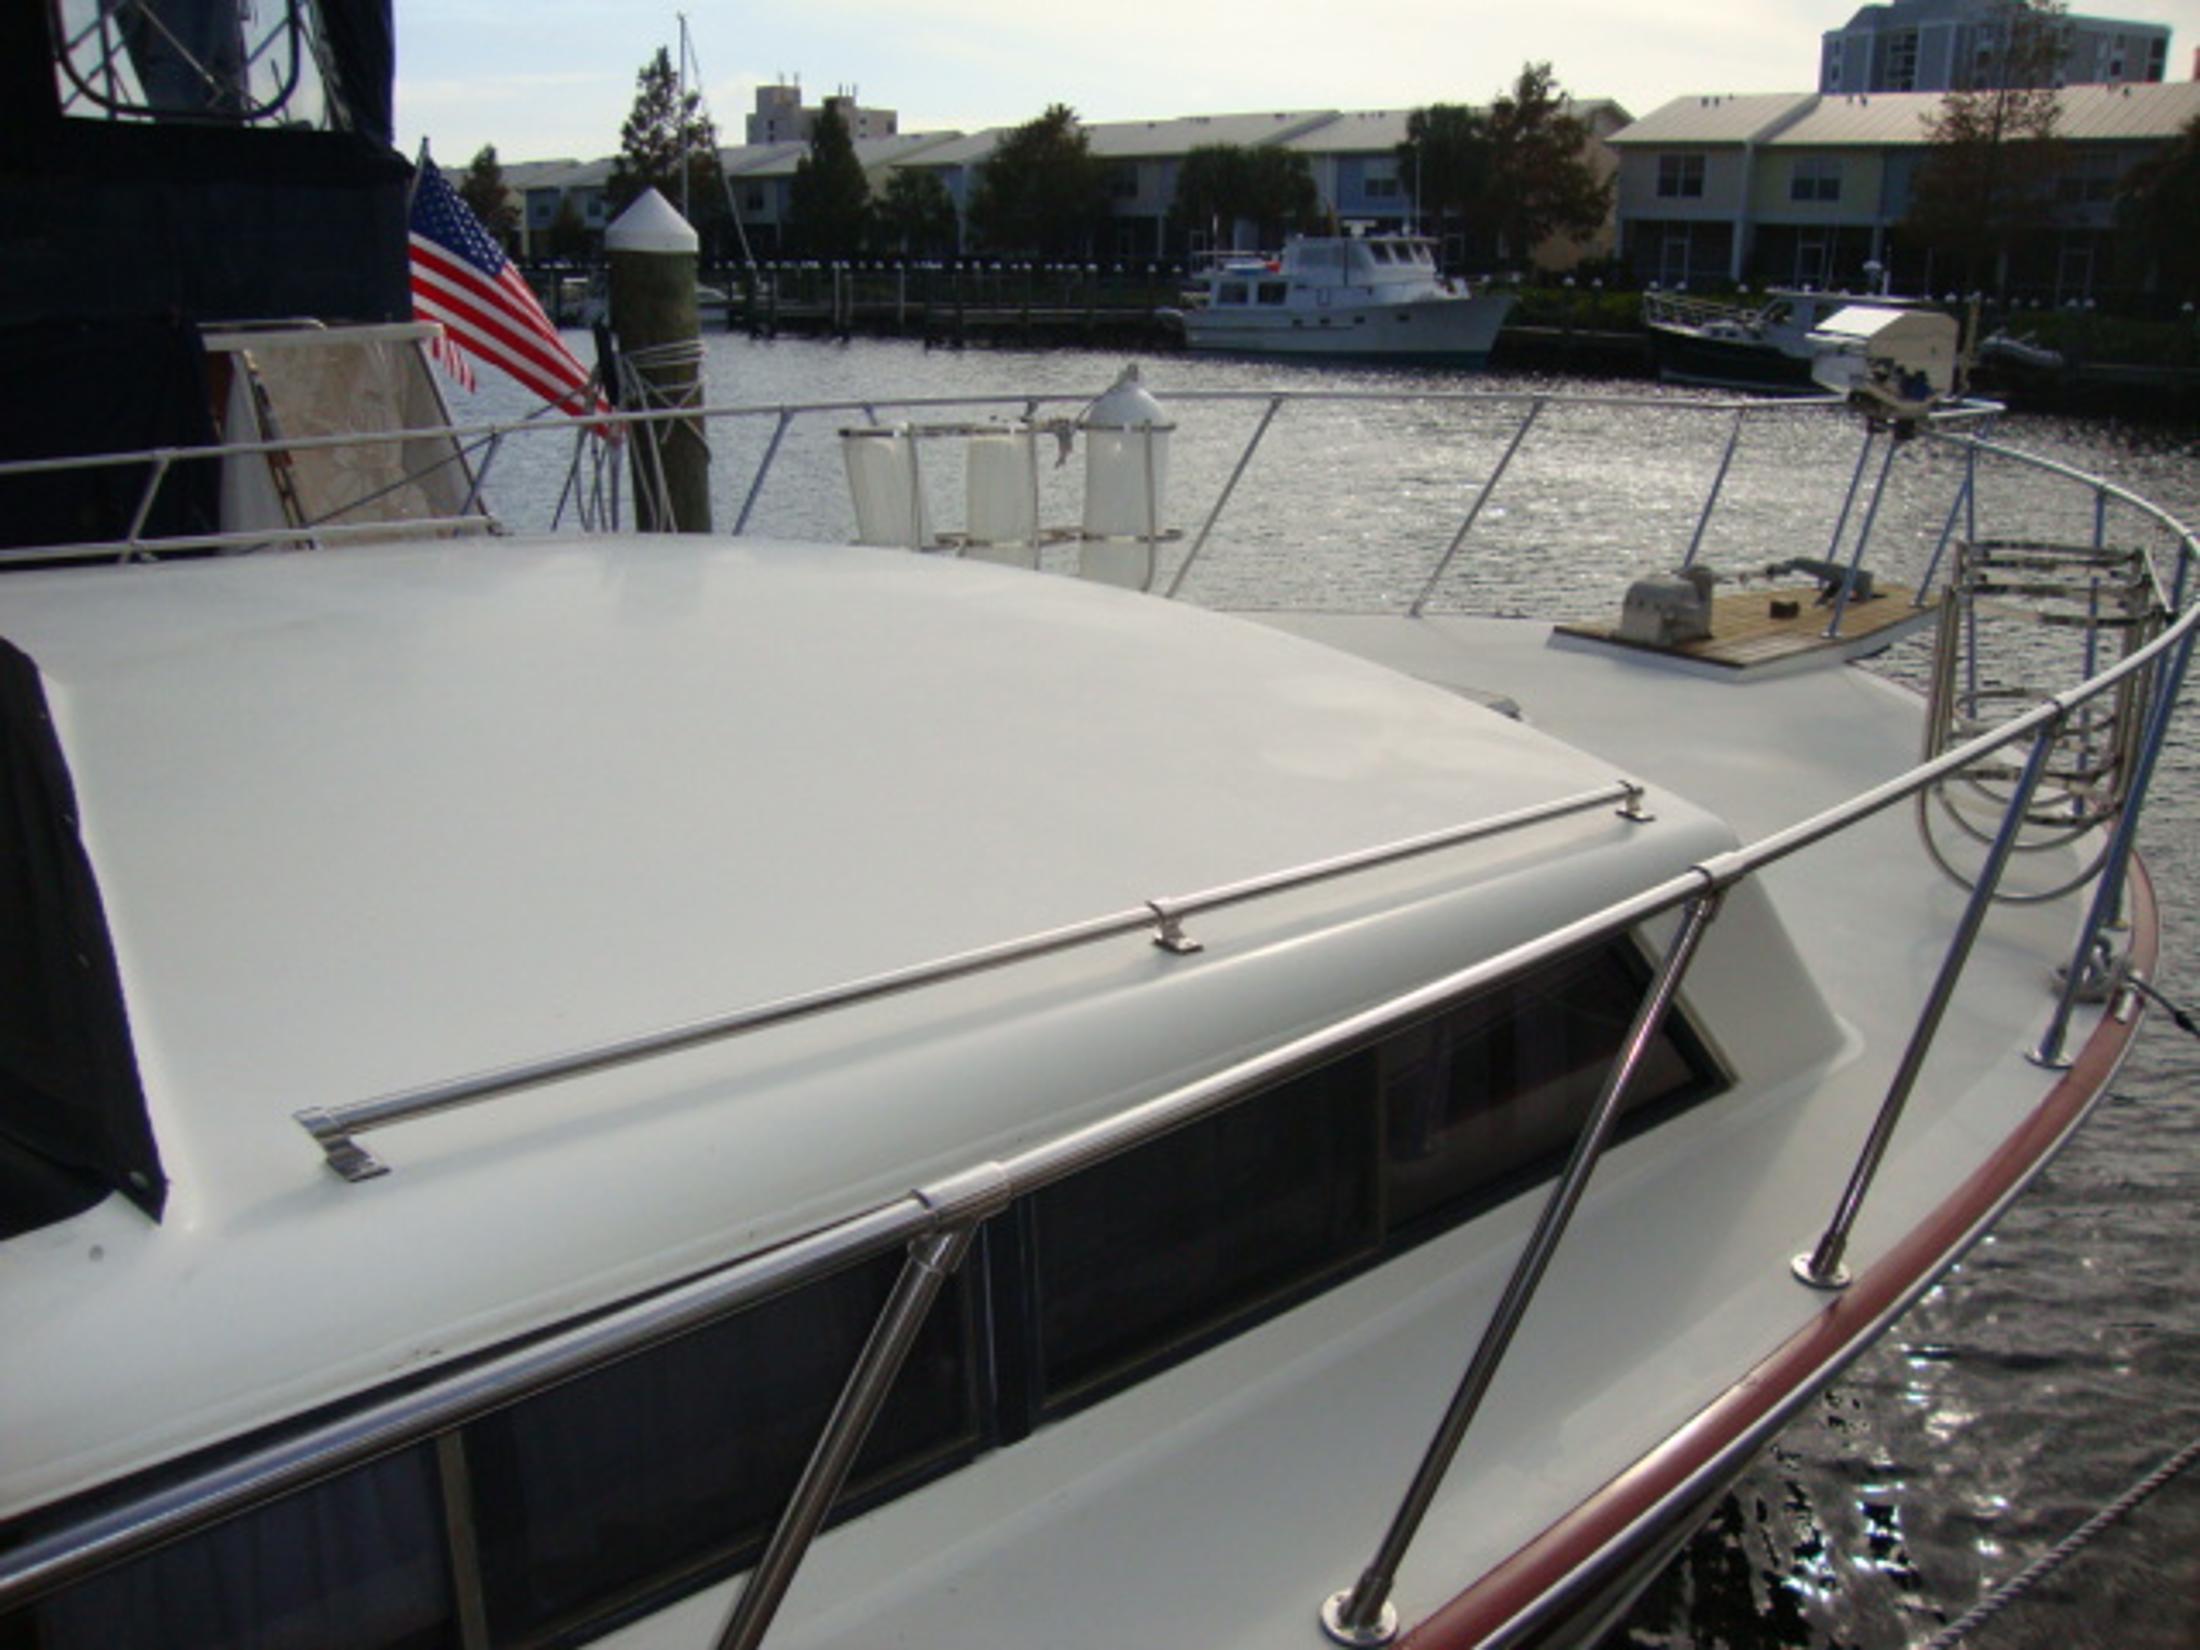 Marinette 37 Marquis Aft Cabin Motor Yacht, North Fort Myers